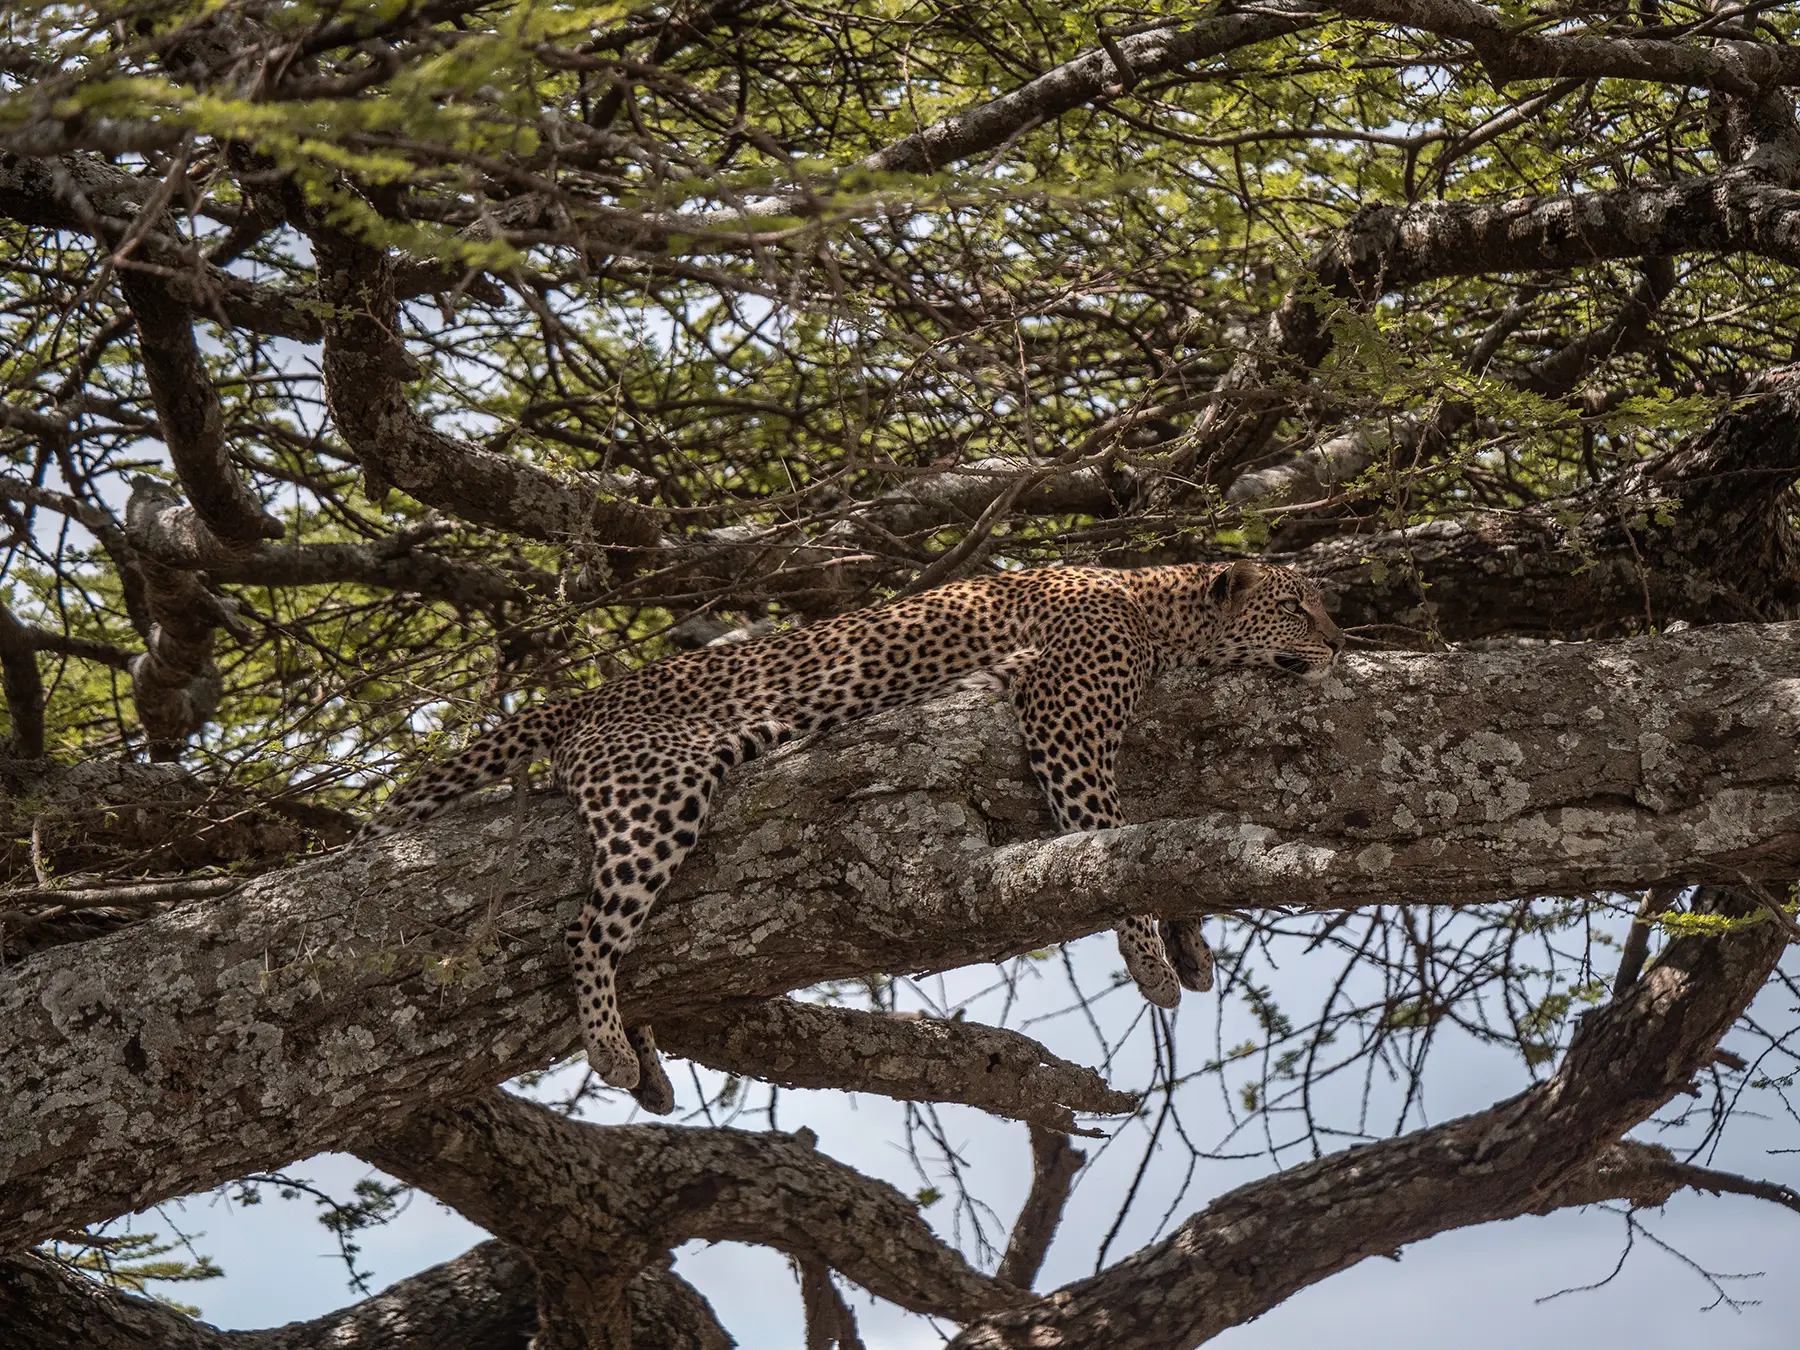 Leopard spotted whilst on safari in Serengeti